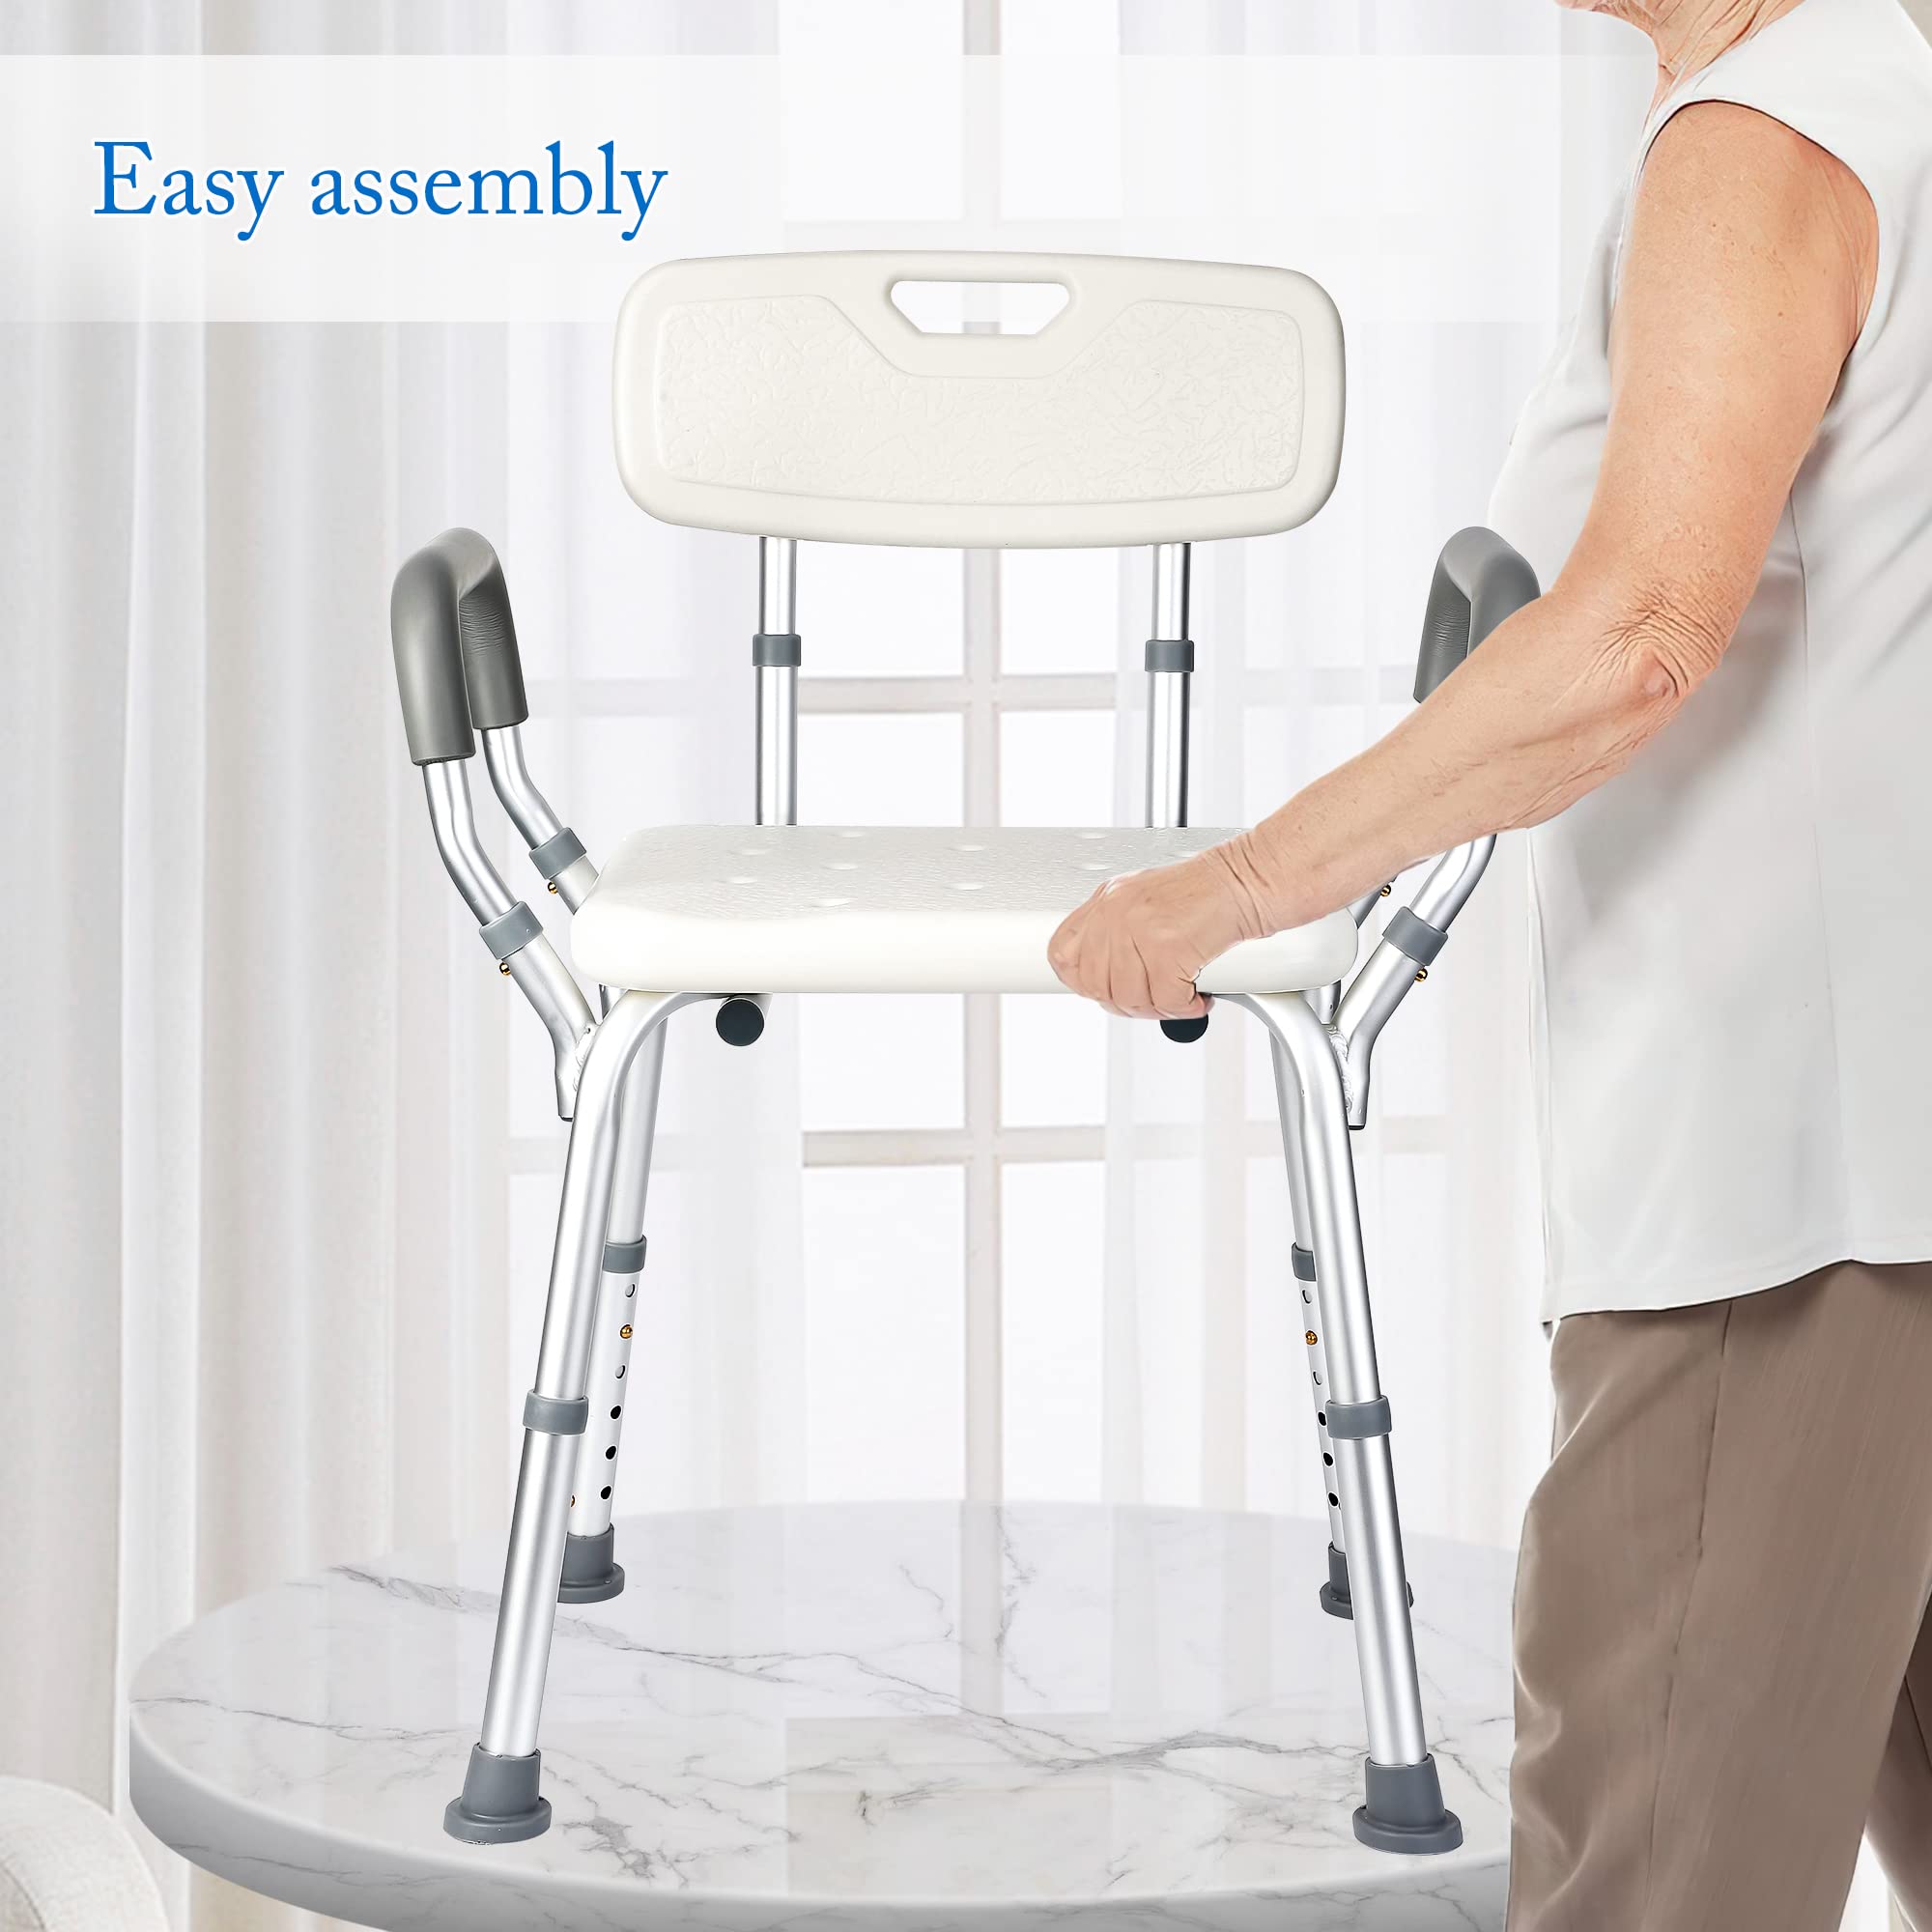 Shower Chair Seat with Padded Armrests for Bathtub Slip Resistant Shower Seat Adjustable Height Shower Chair 350 lb Capacity